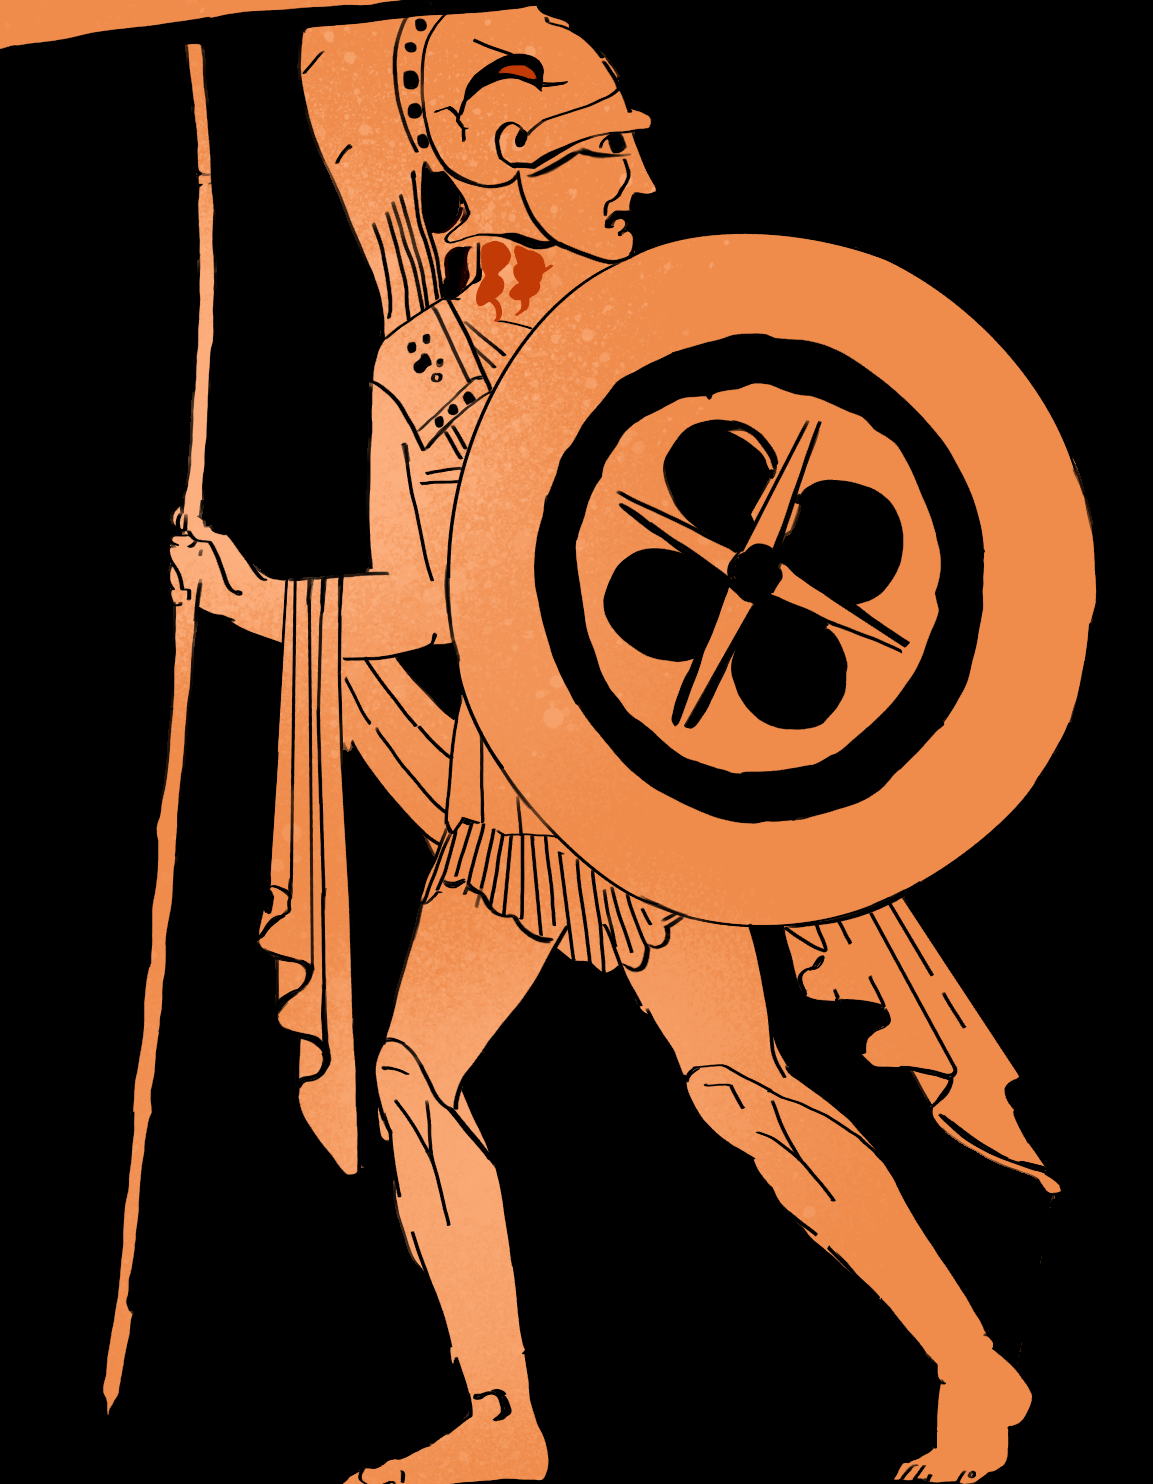 Ares walking, his head turned back over his shoulder to look at Pandora (out of frame). He is wearing Greek hoplite armour and a plumed helm, and carrying a circular shield and a spear.